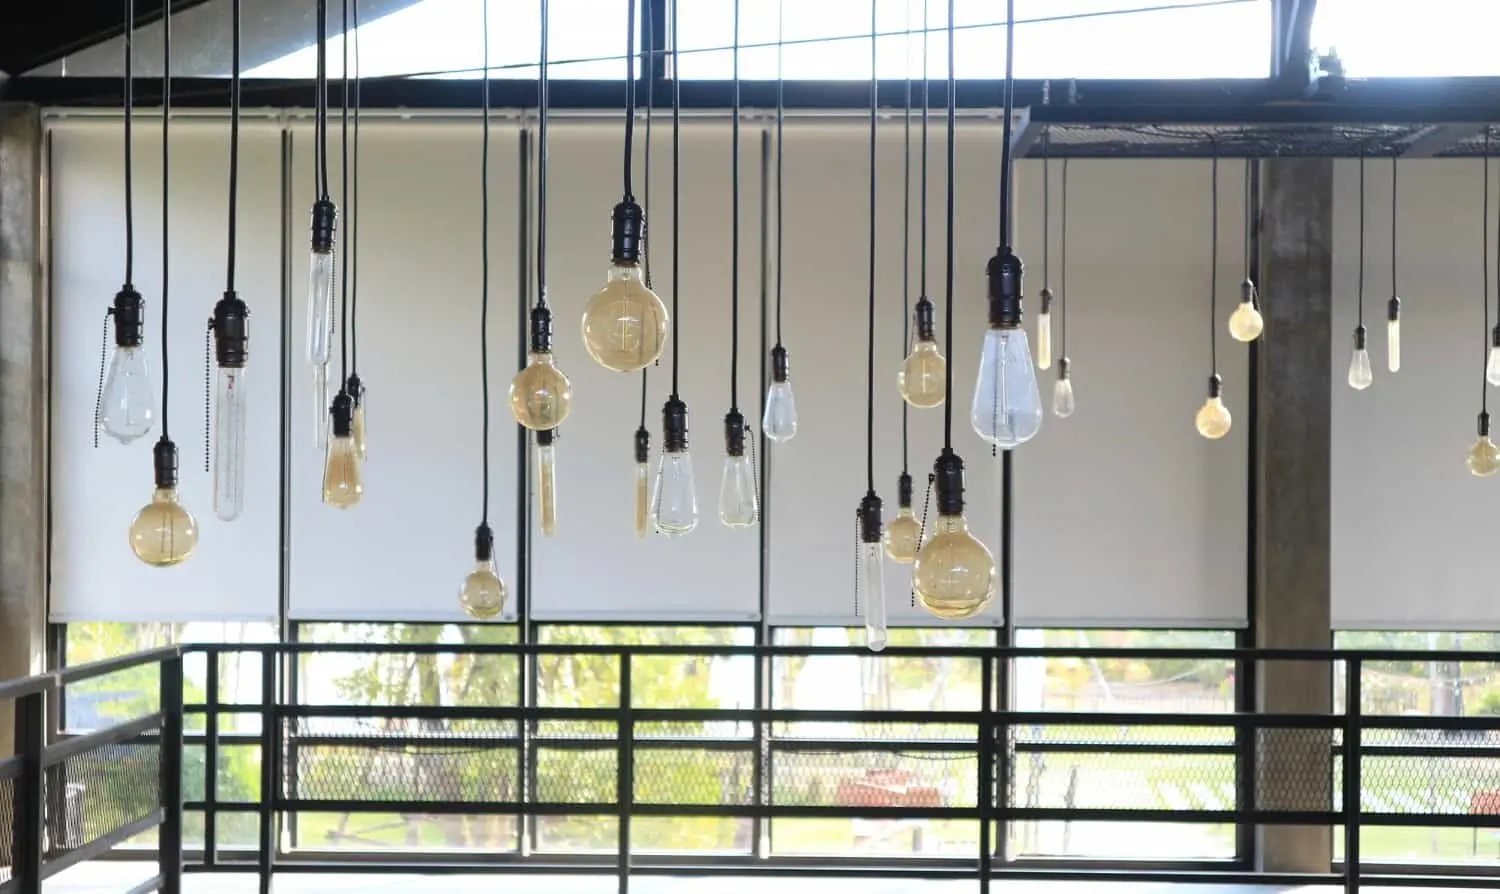 A room with numerous pendant light bulbs hanging from the ceiling